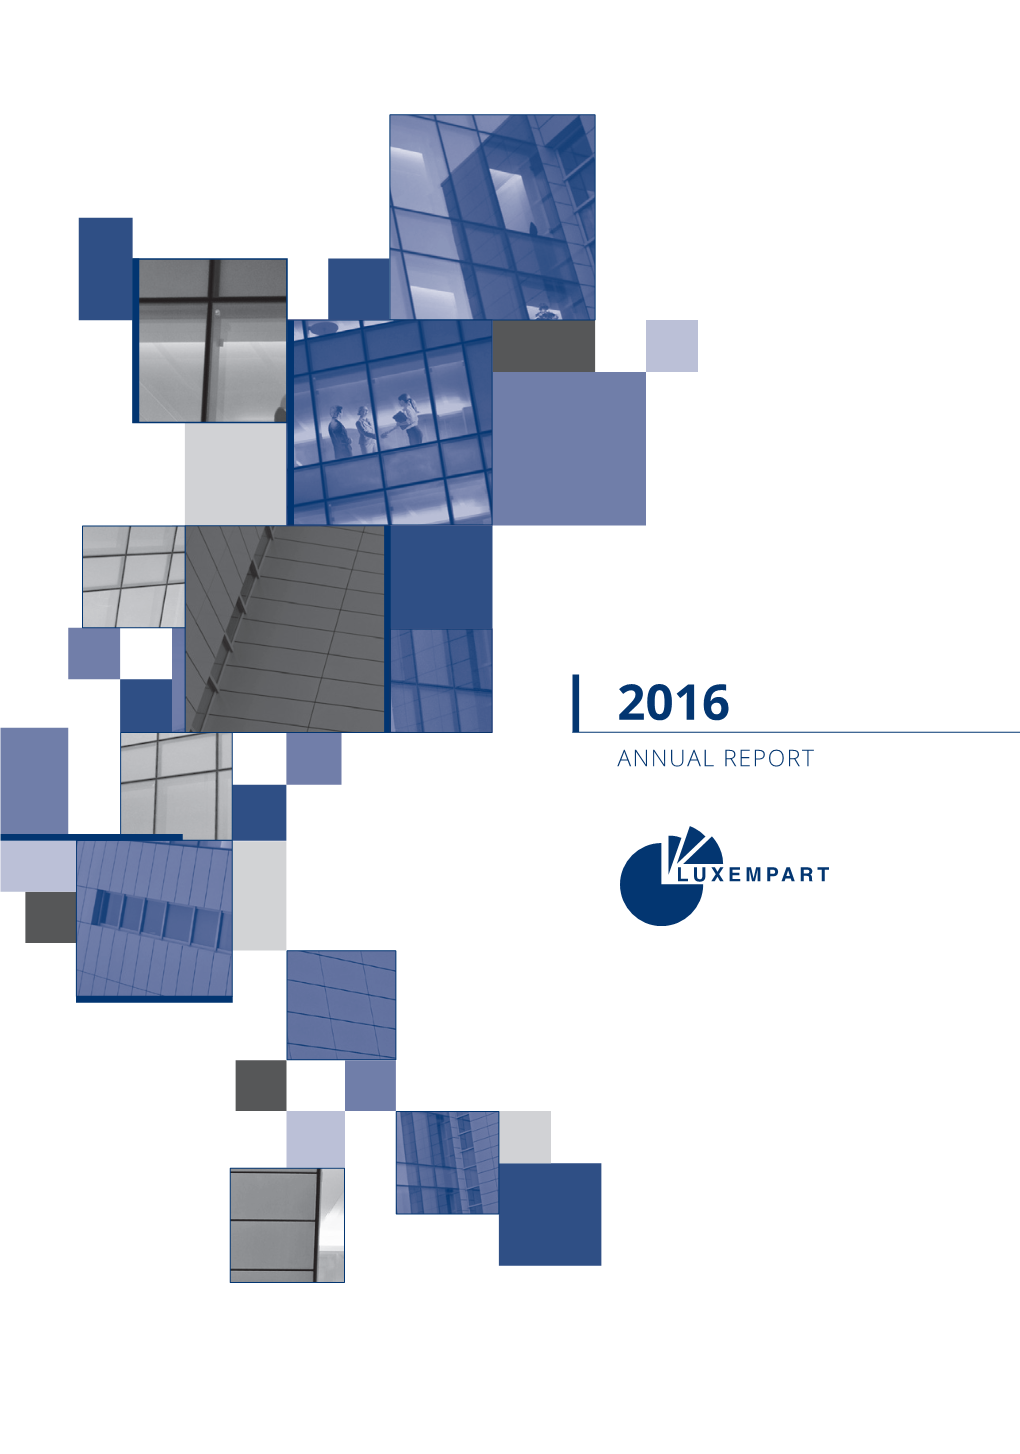 Annual Report Net Assets